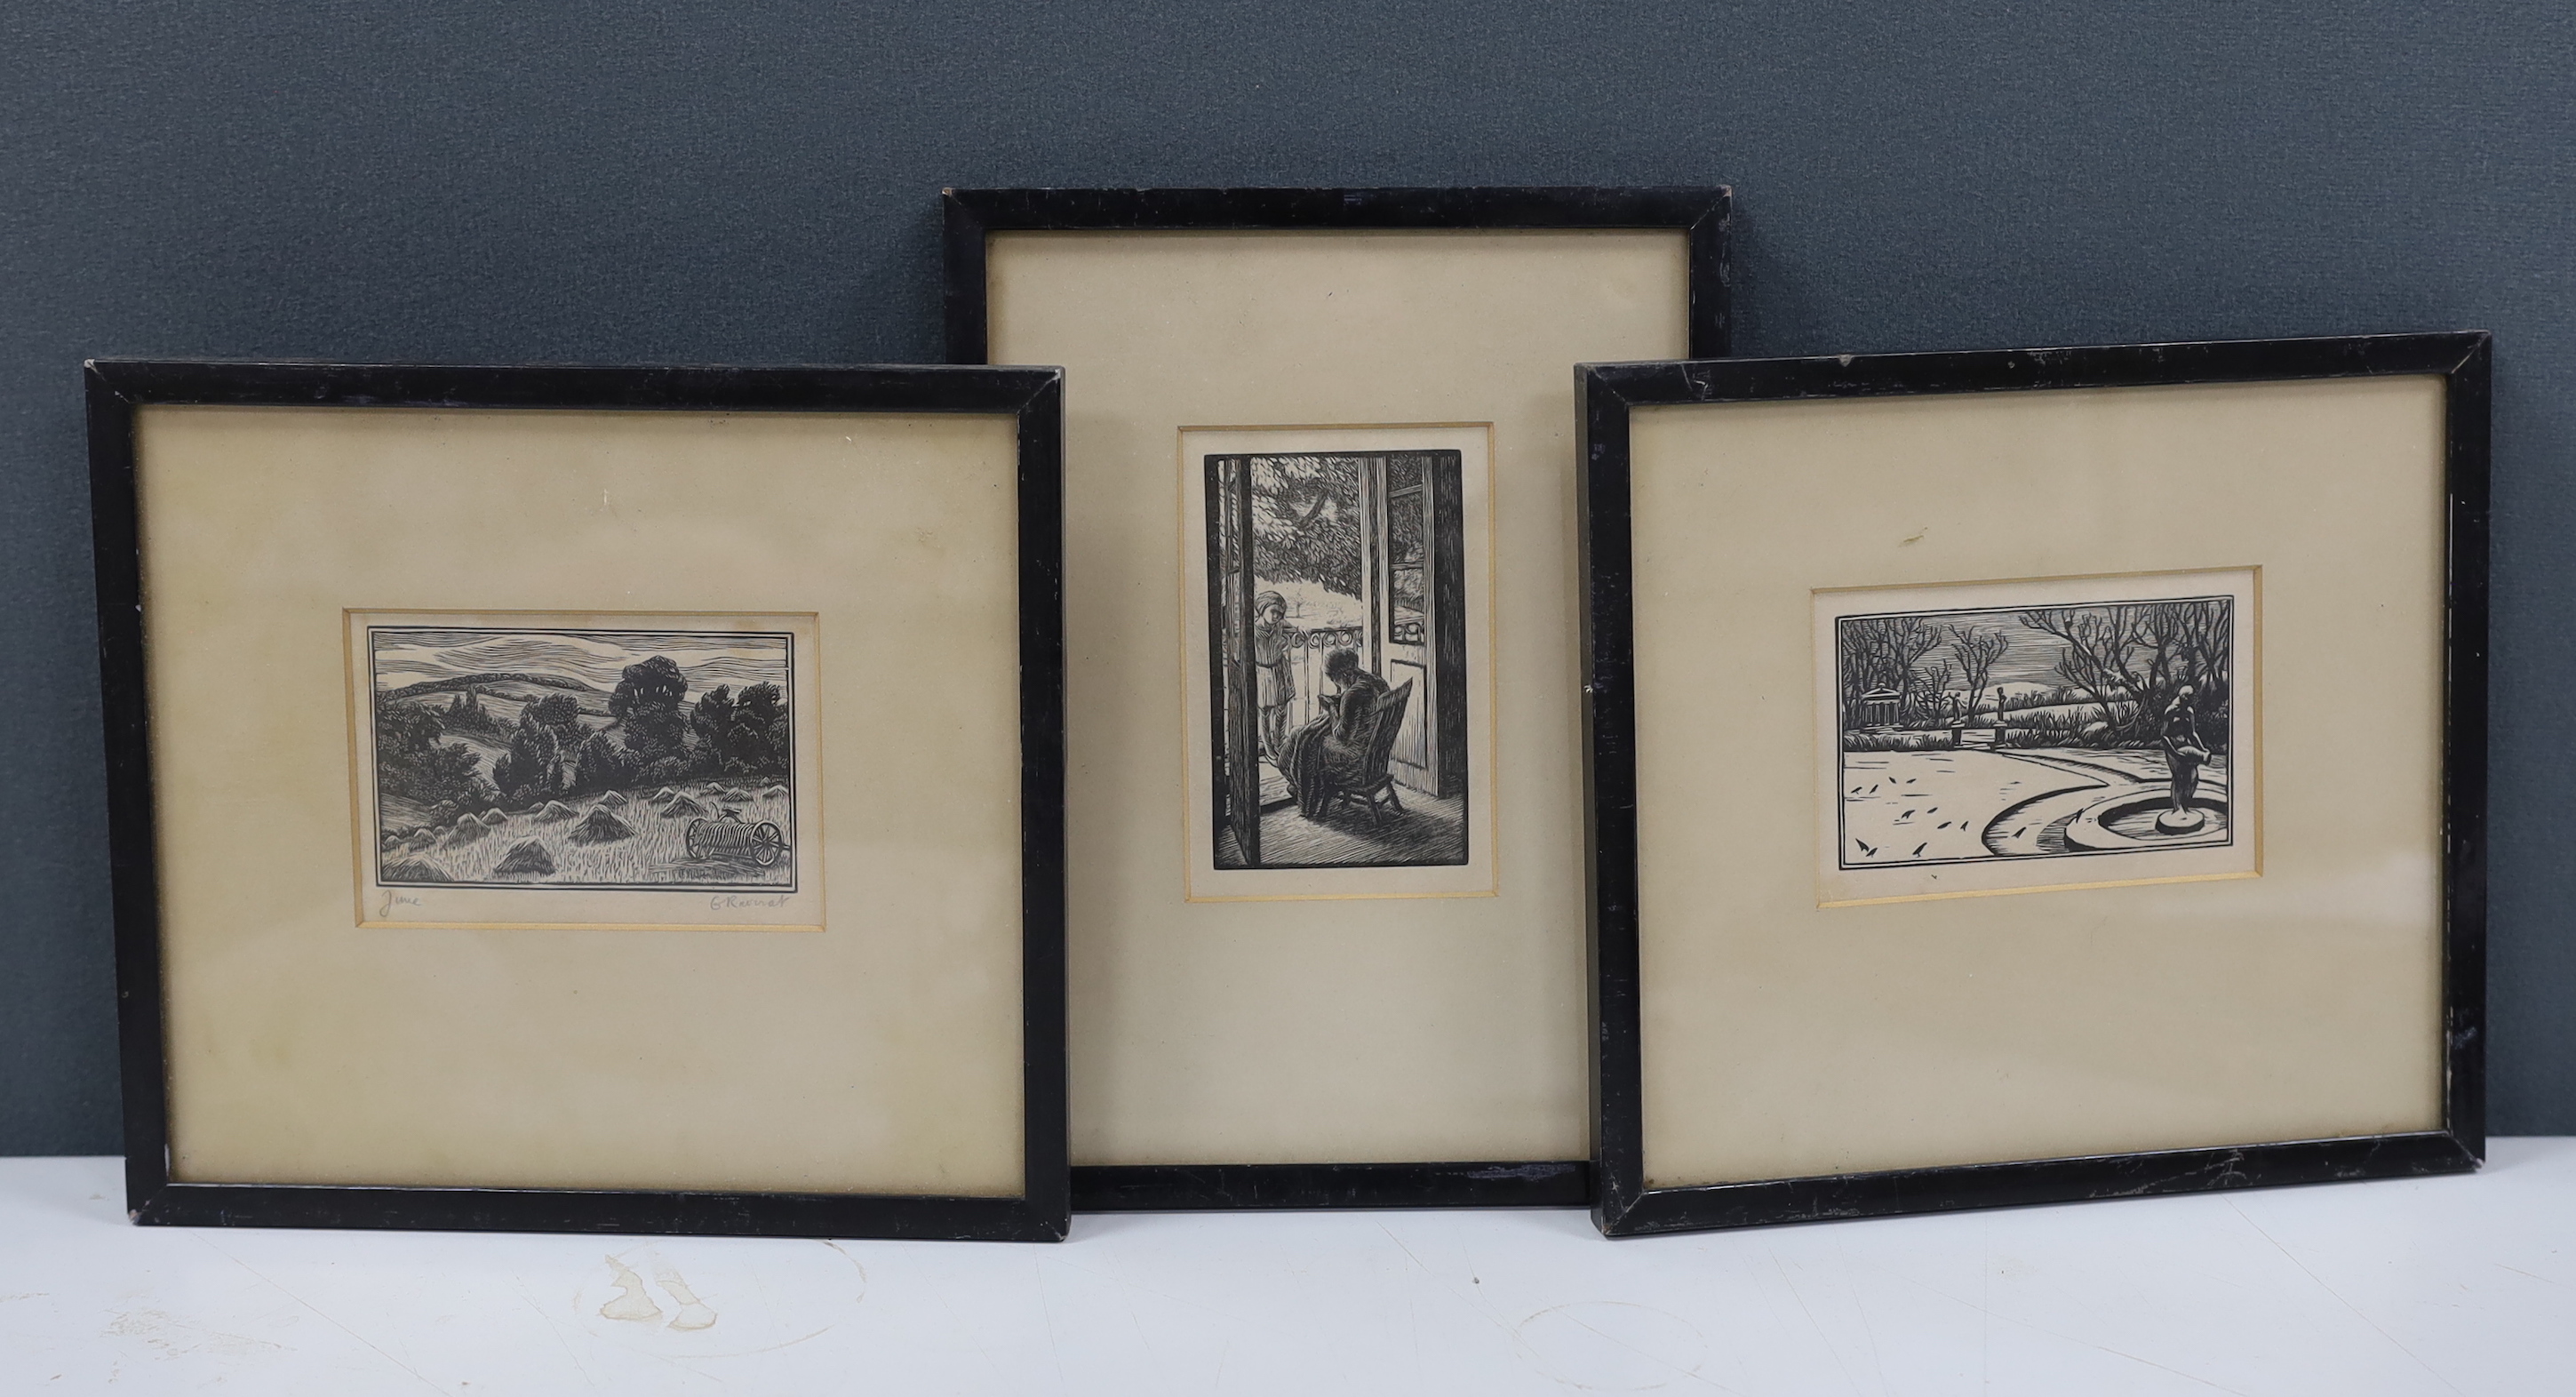 Gwen Raverat (1885-1957), three etchings or woodcuts (probably from Thomas Agnews), comprising 'December', 'June' and 'The Balcony', one signed and inscribed in pencil, largest 11 x 7cm